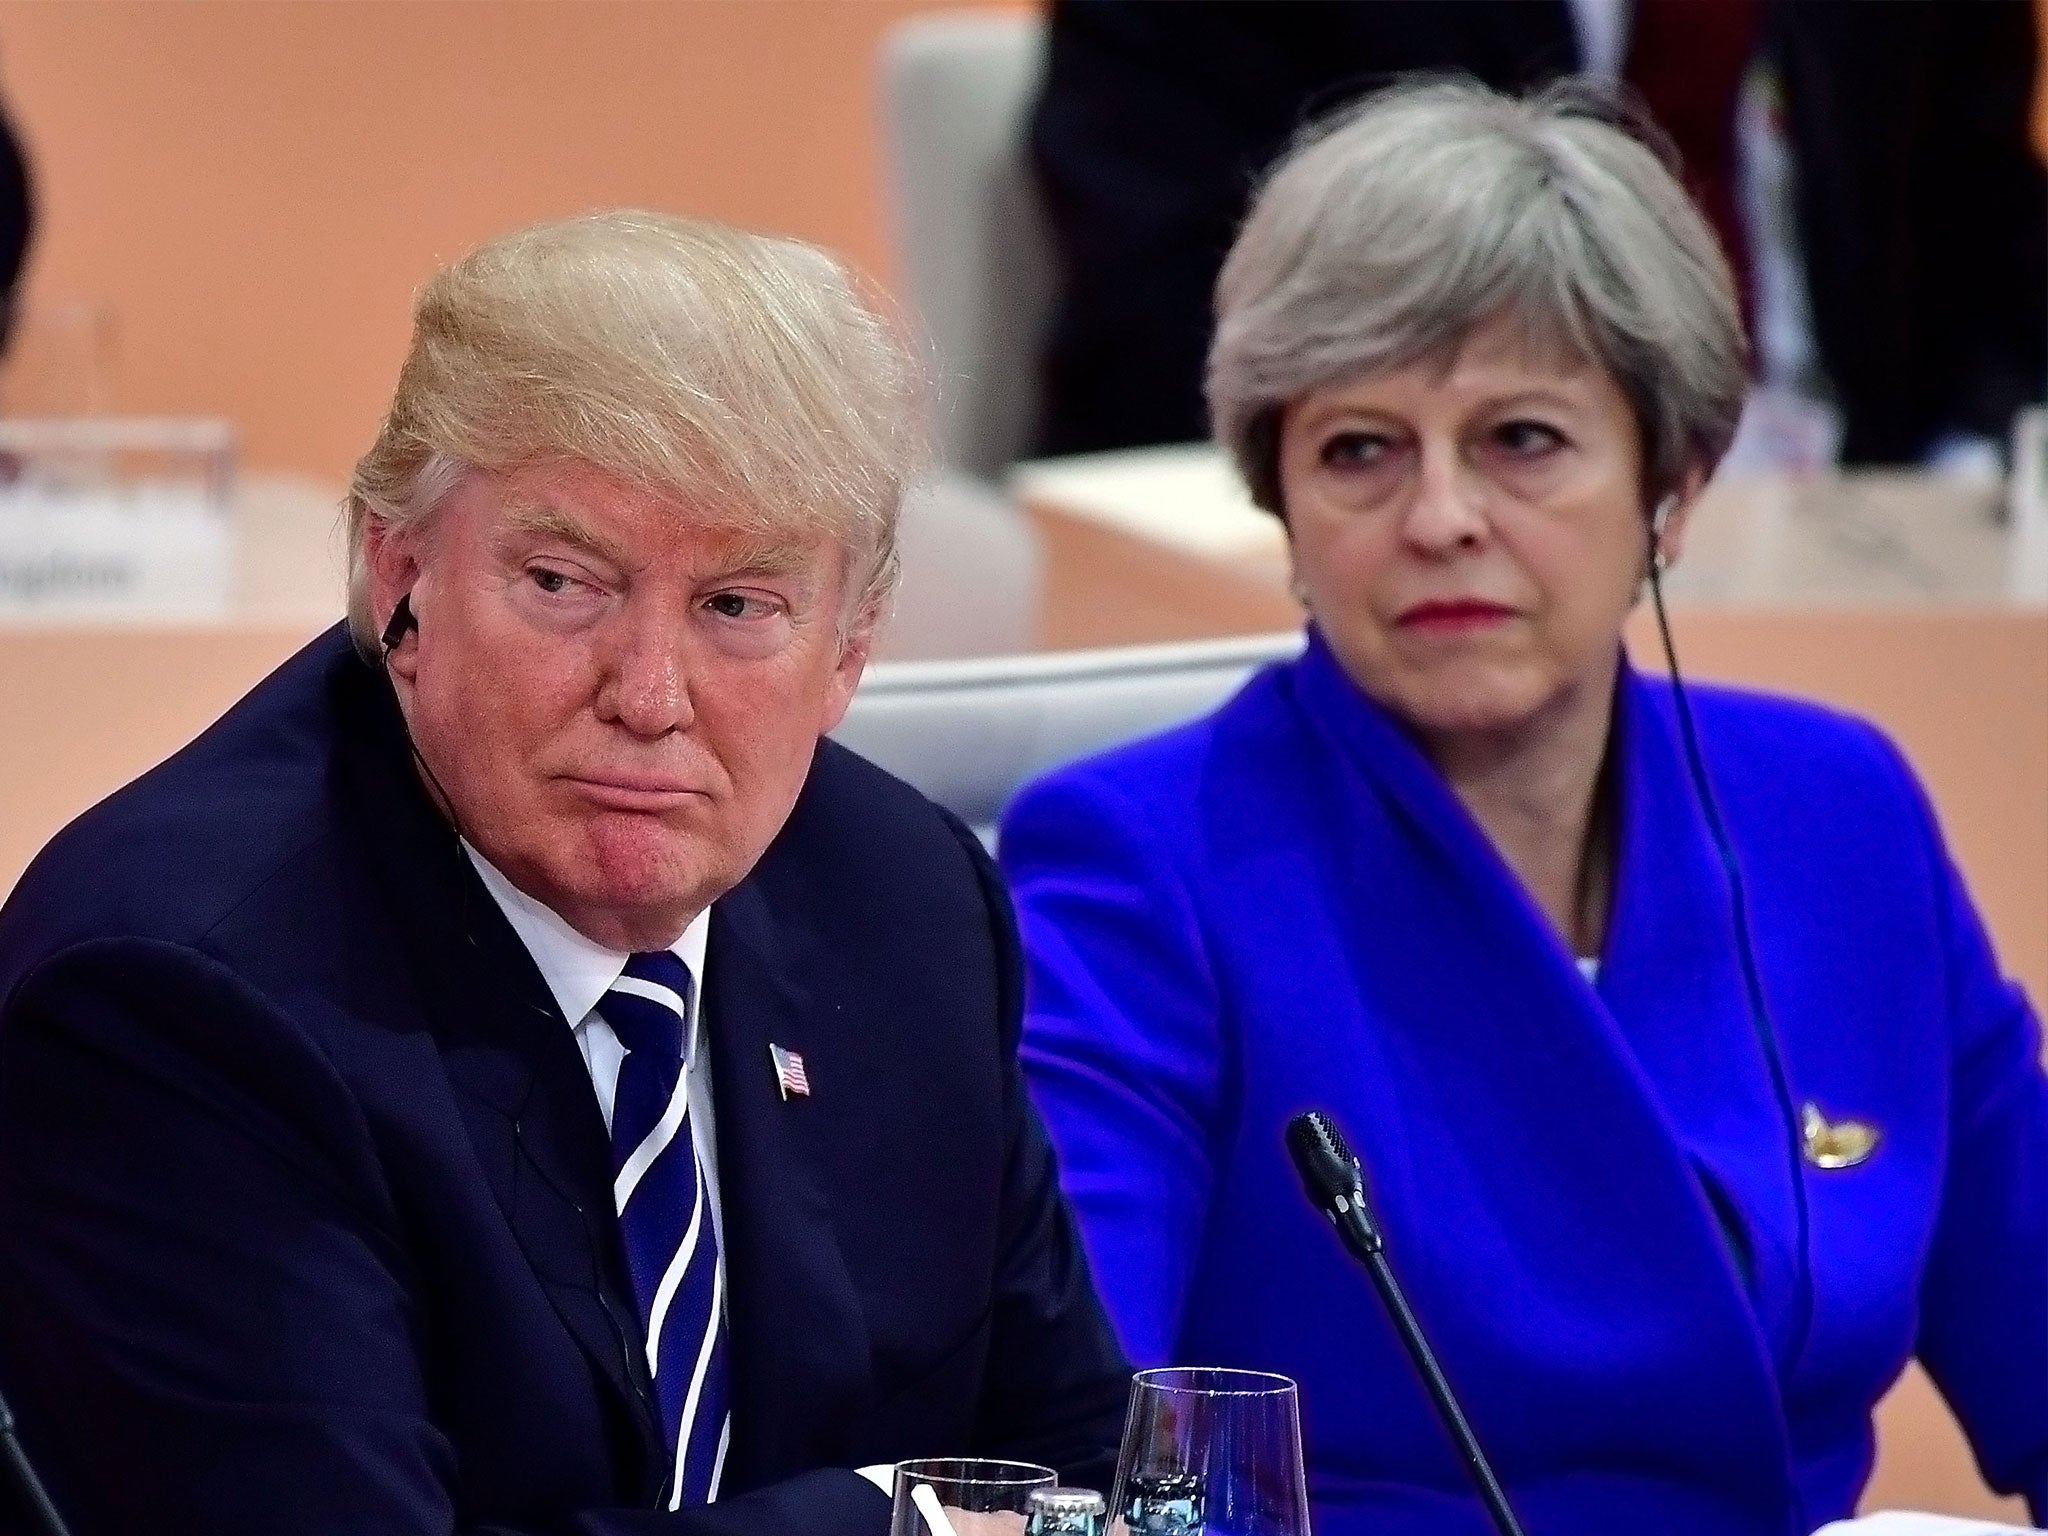 The report notes Mr Trump may be less pivotal to the future of the UK-US 'special relationship' than Ms May has suggested